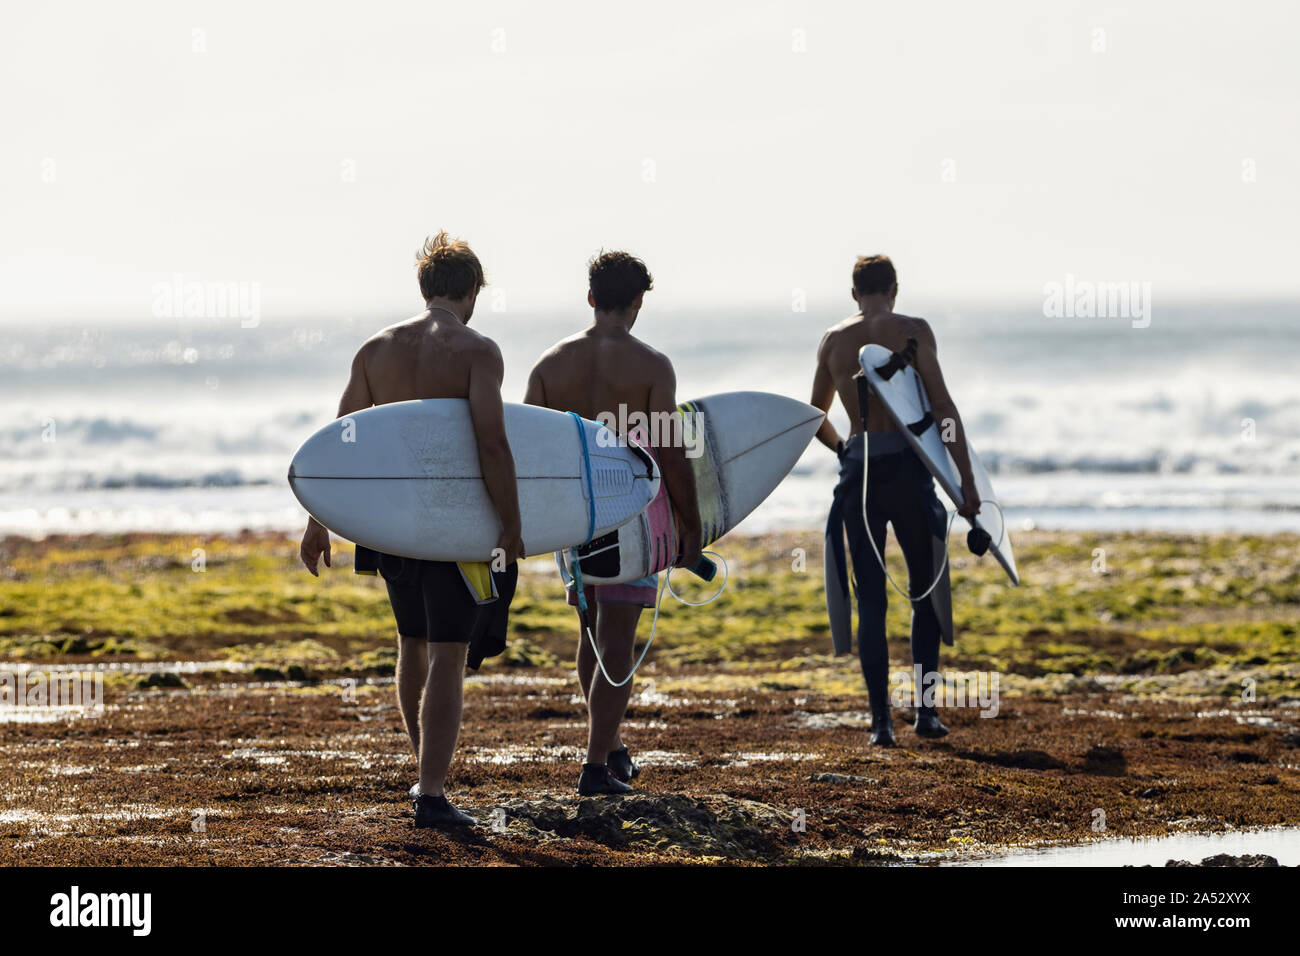 Group of men with surfboard walking on the beach Stock Photo